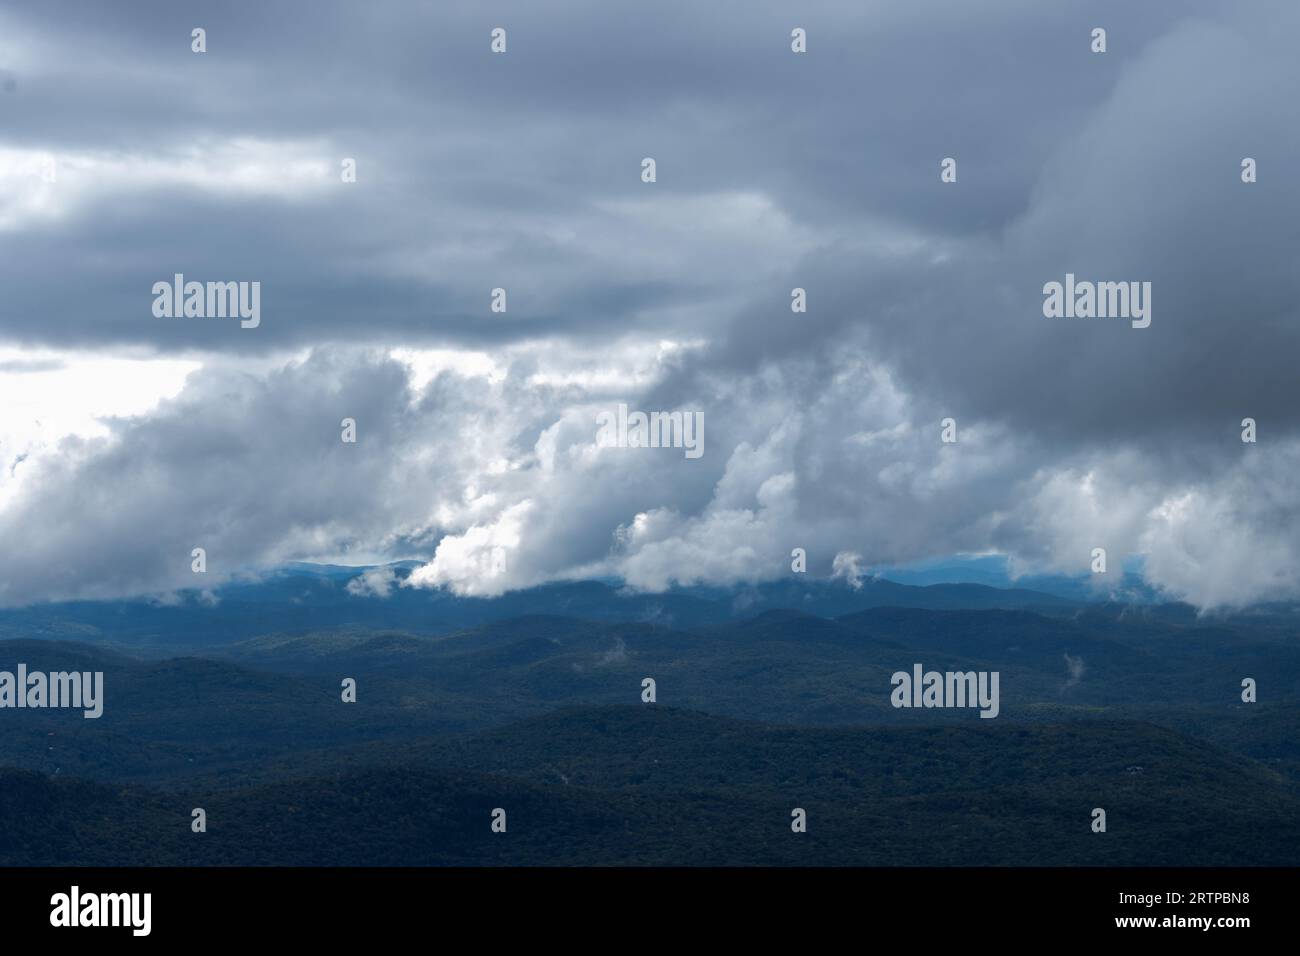 Bruised clouds sit on top of blue mountains; serene and yet ominous Stock Photo